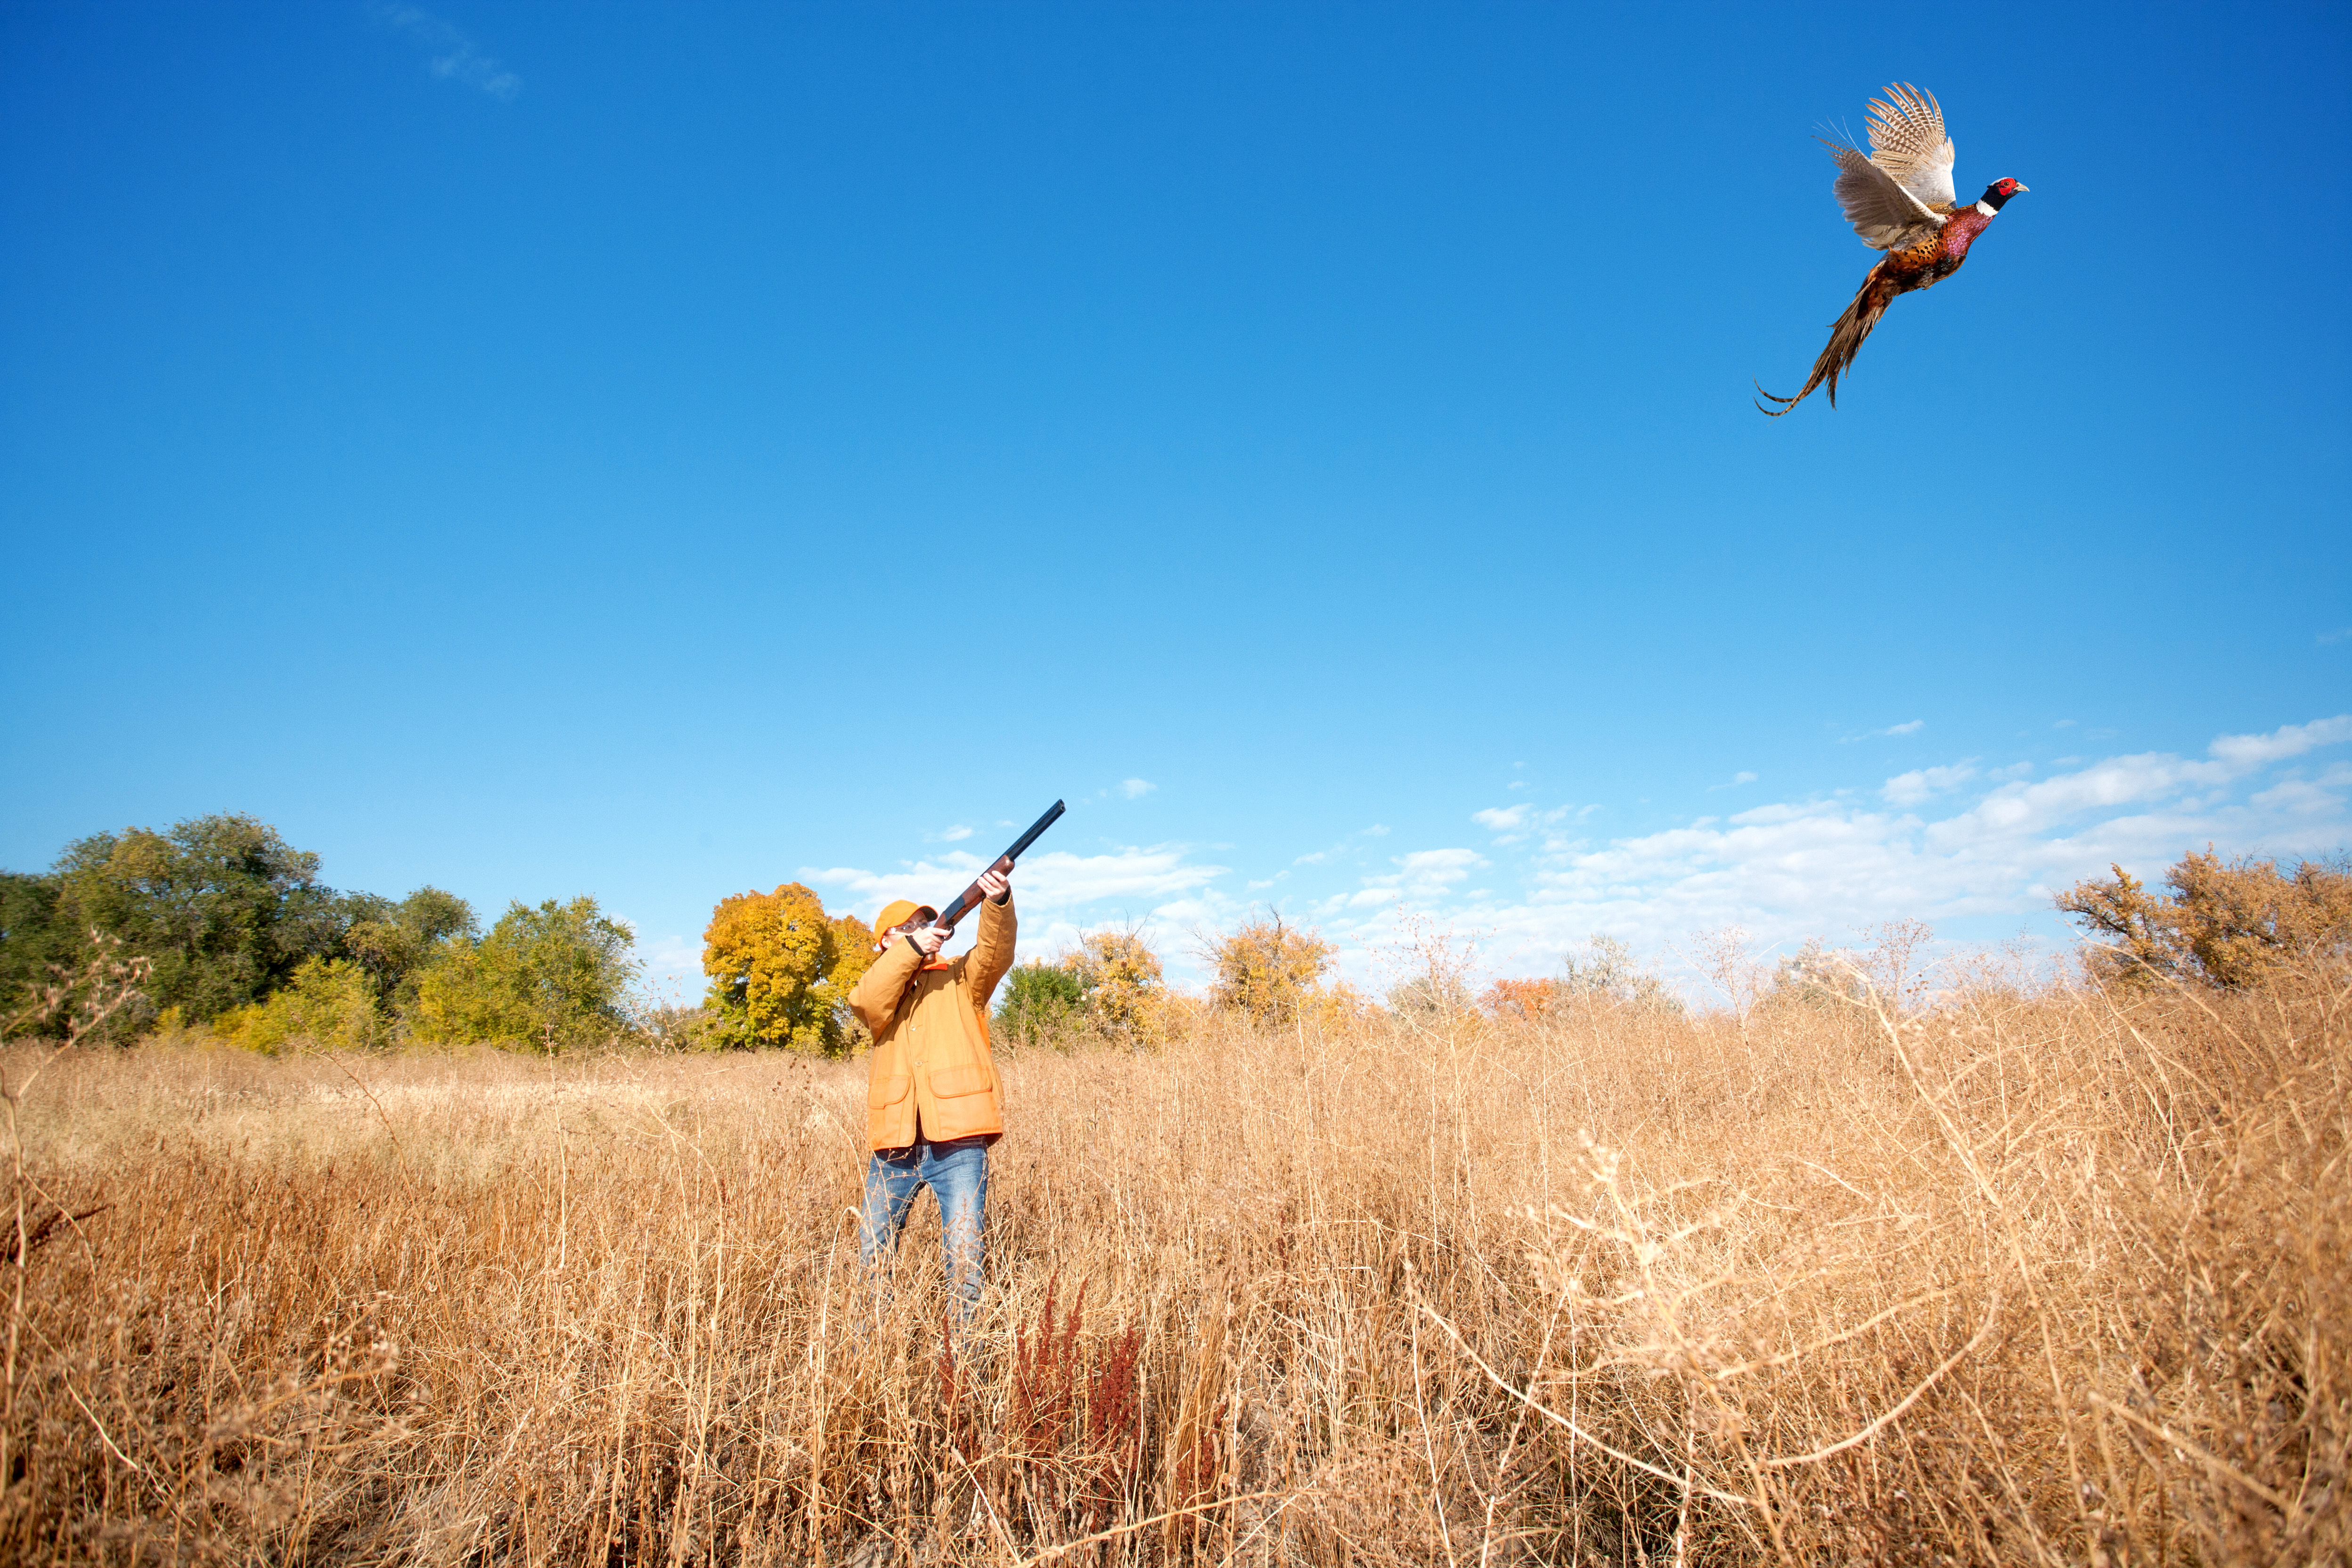 A hunter aims at a pheasant, hunter safety education concept. 